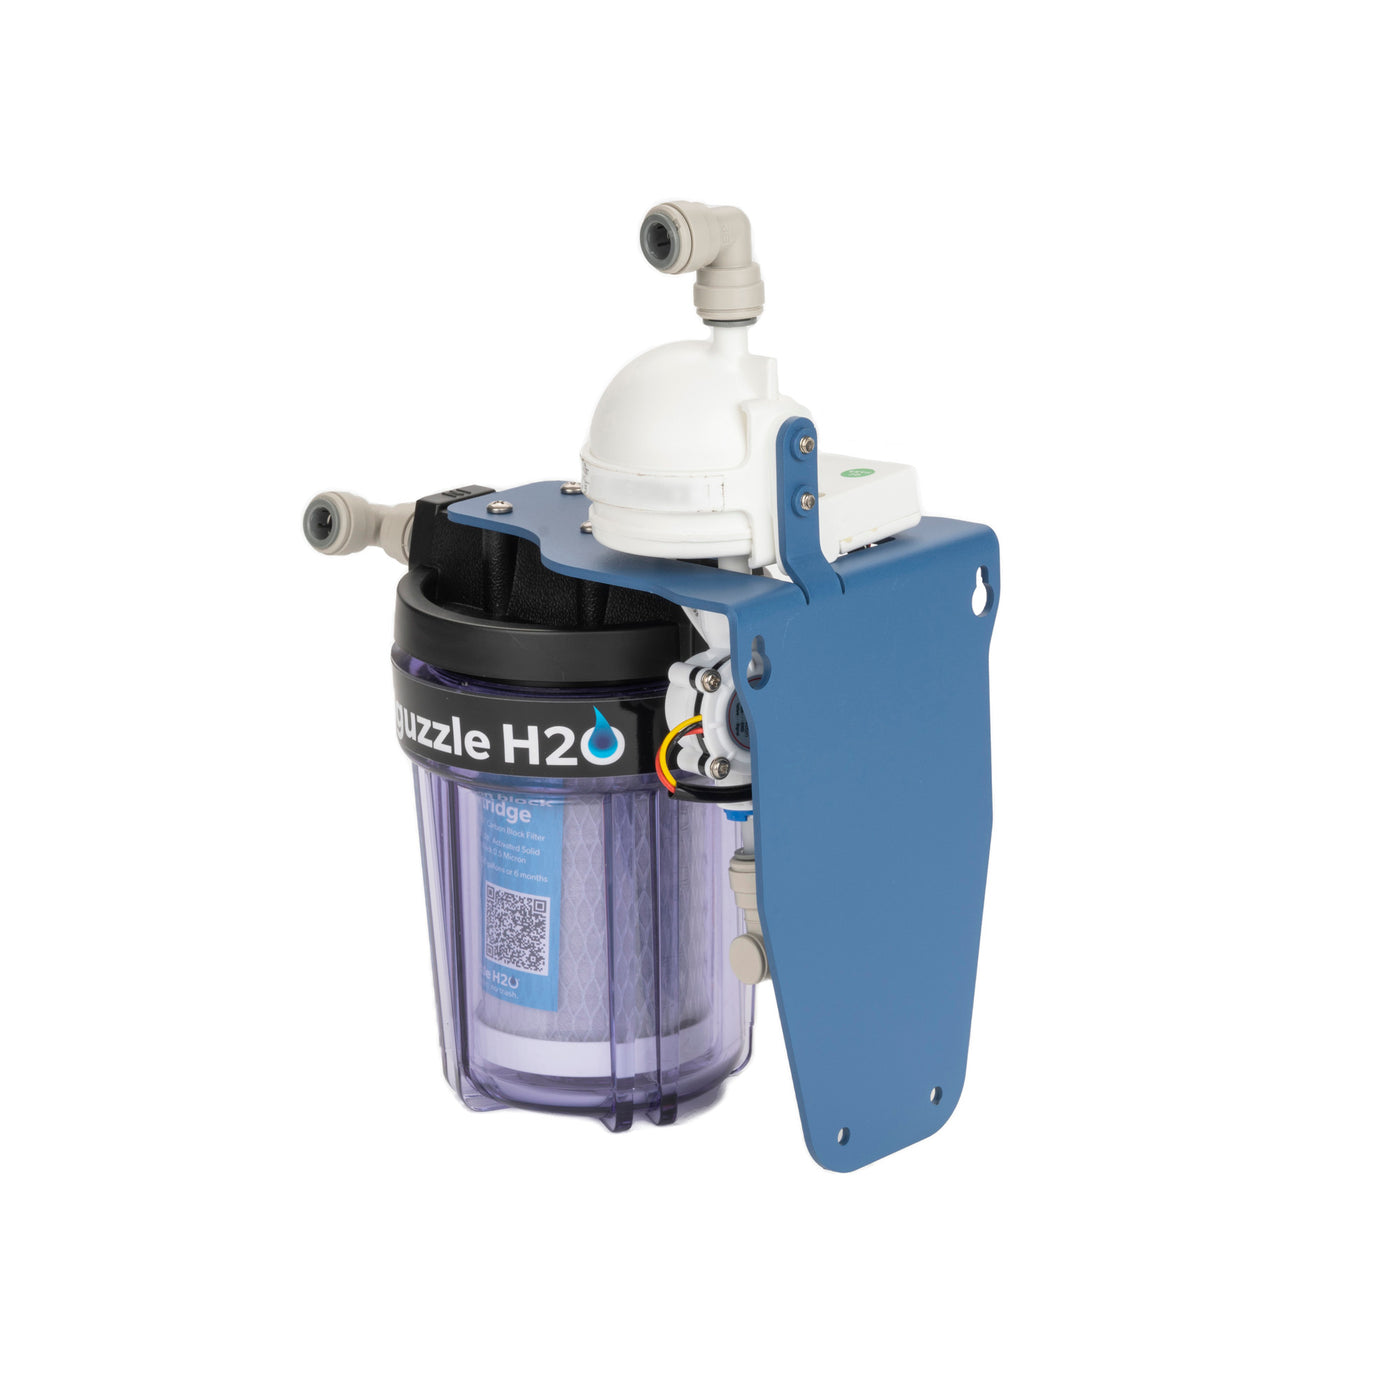 Guzzle H2O Stealth 5 Water Purification and Filtration System